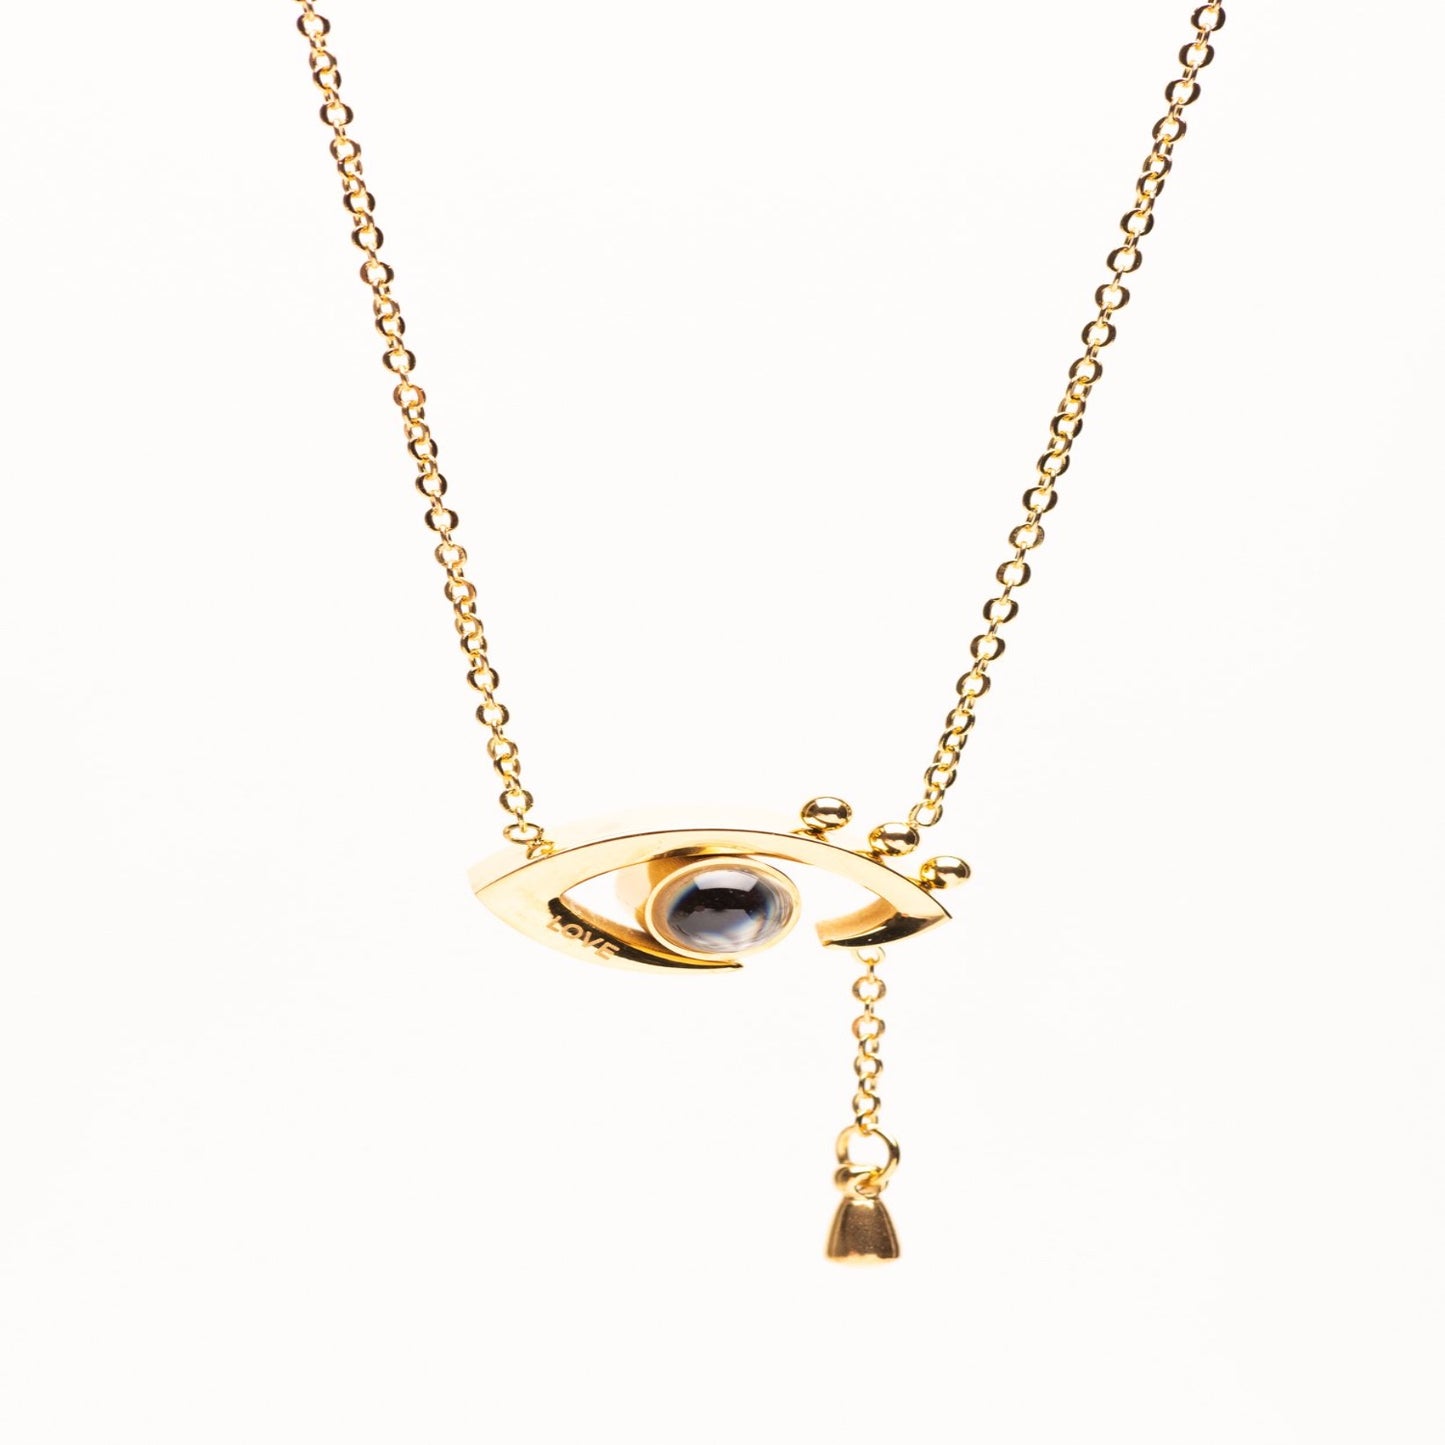 Stainless Steel Gold tone evil eye necklace